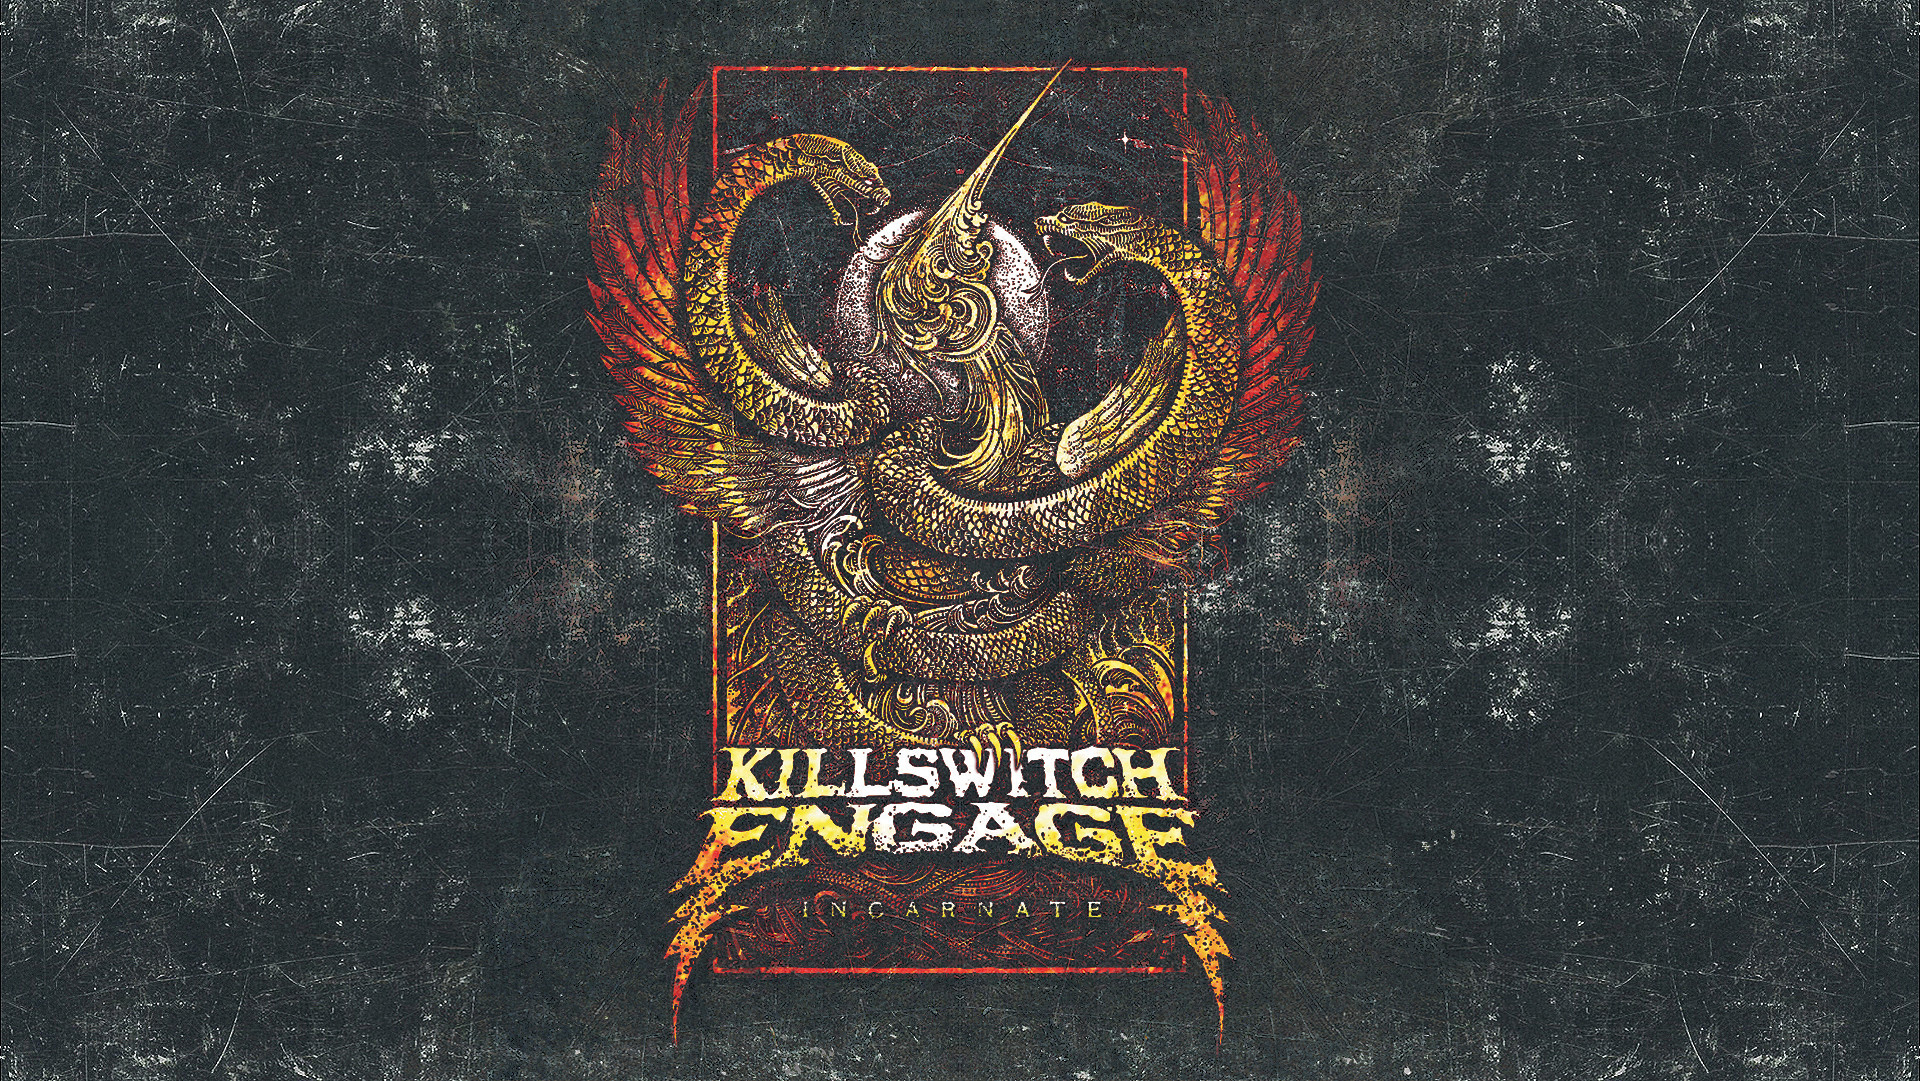 killswitch engage disarm the descent download zip